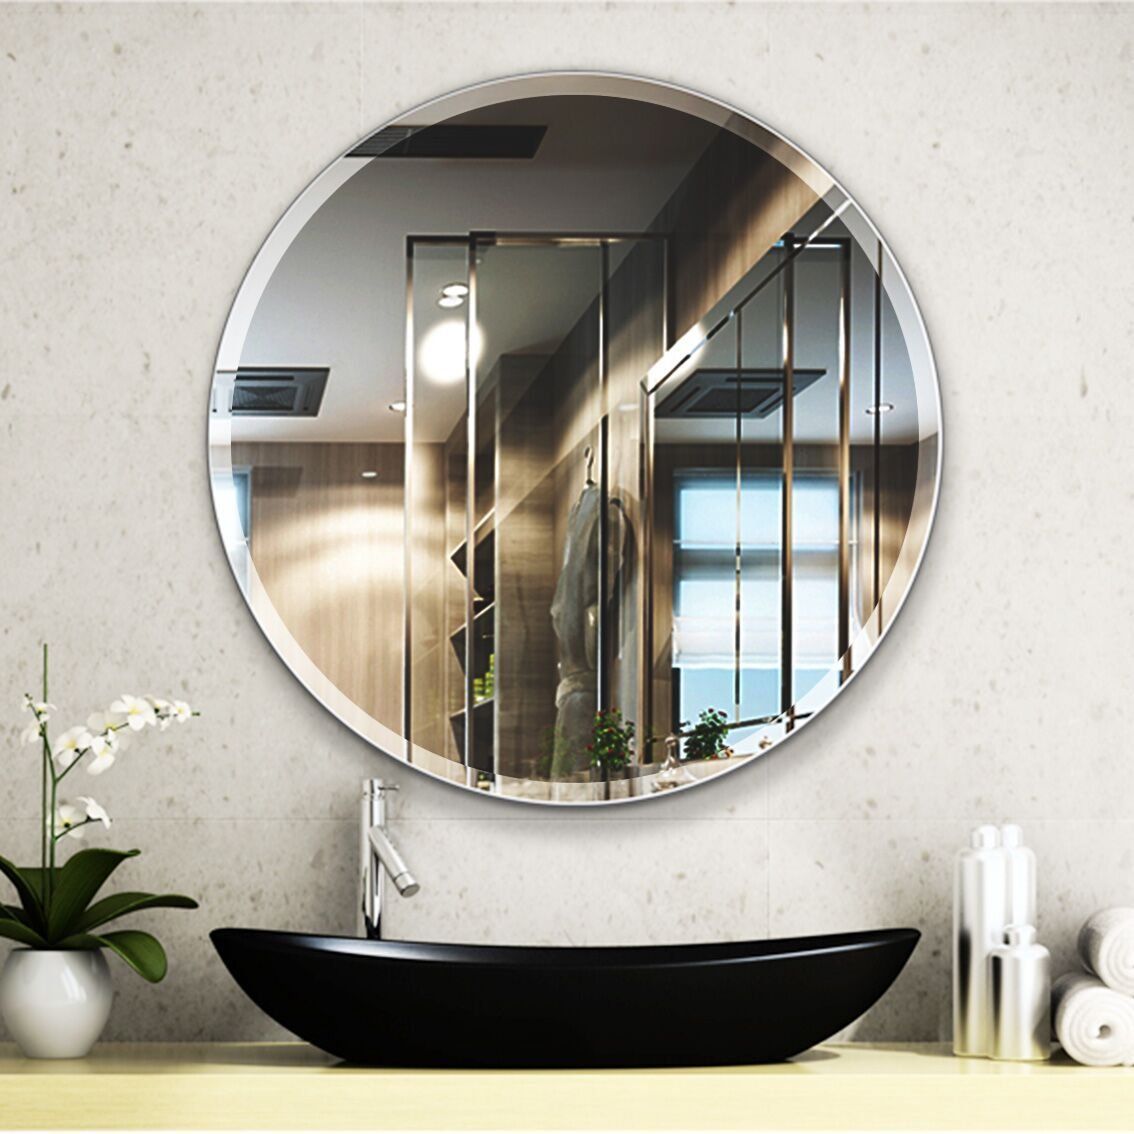 28 Inch Round Frameless Mirror Large Beveled Wall Mirror | Mirror Wall Regarding Crown Frameless Beveled Wall Mirrors (View 9 of 15)